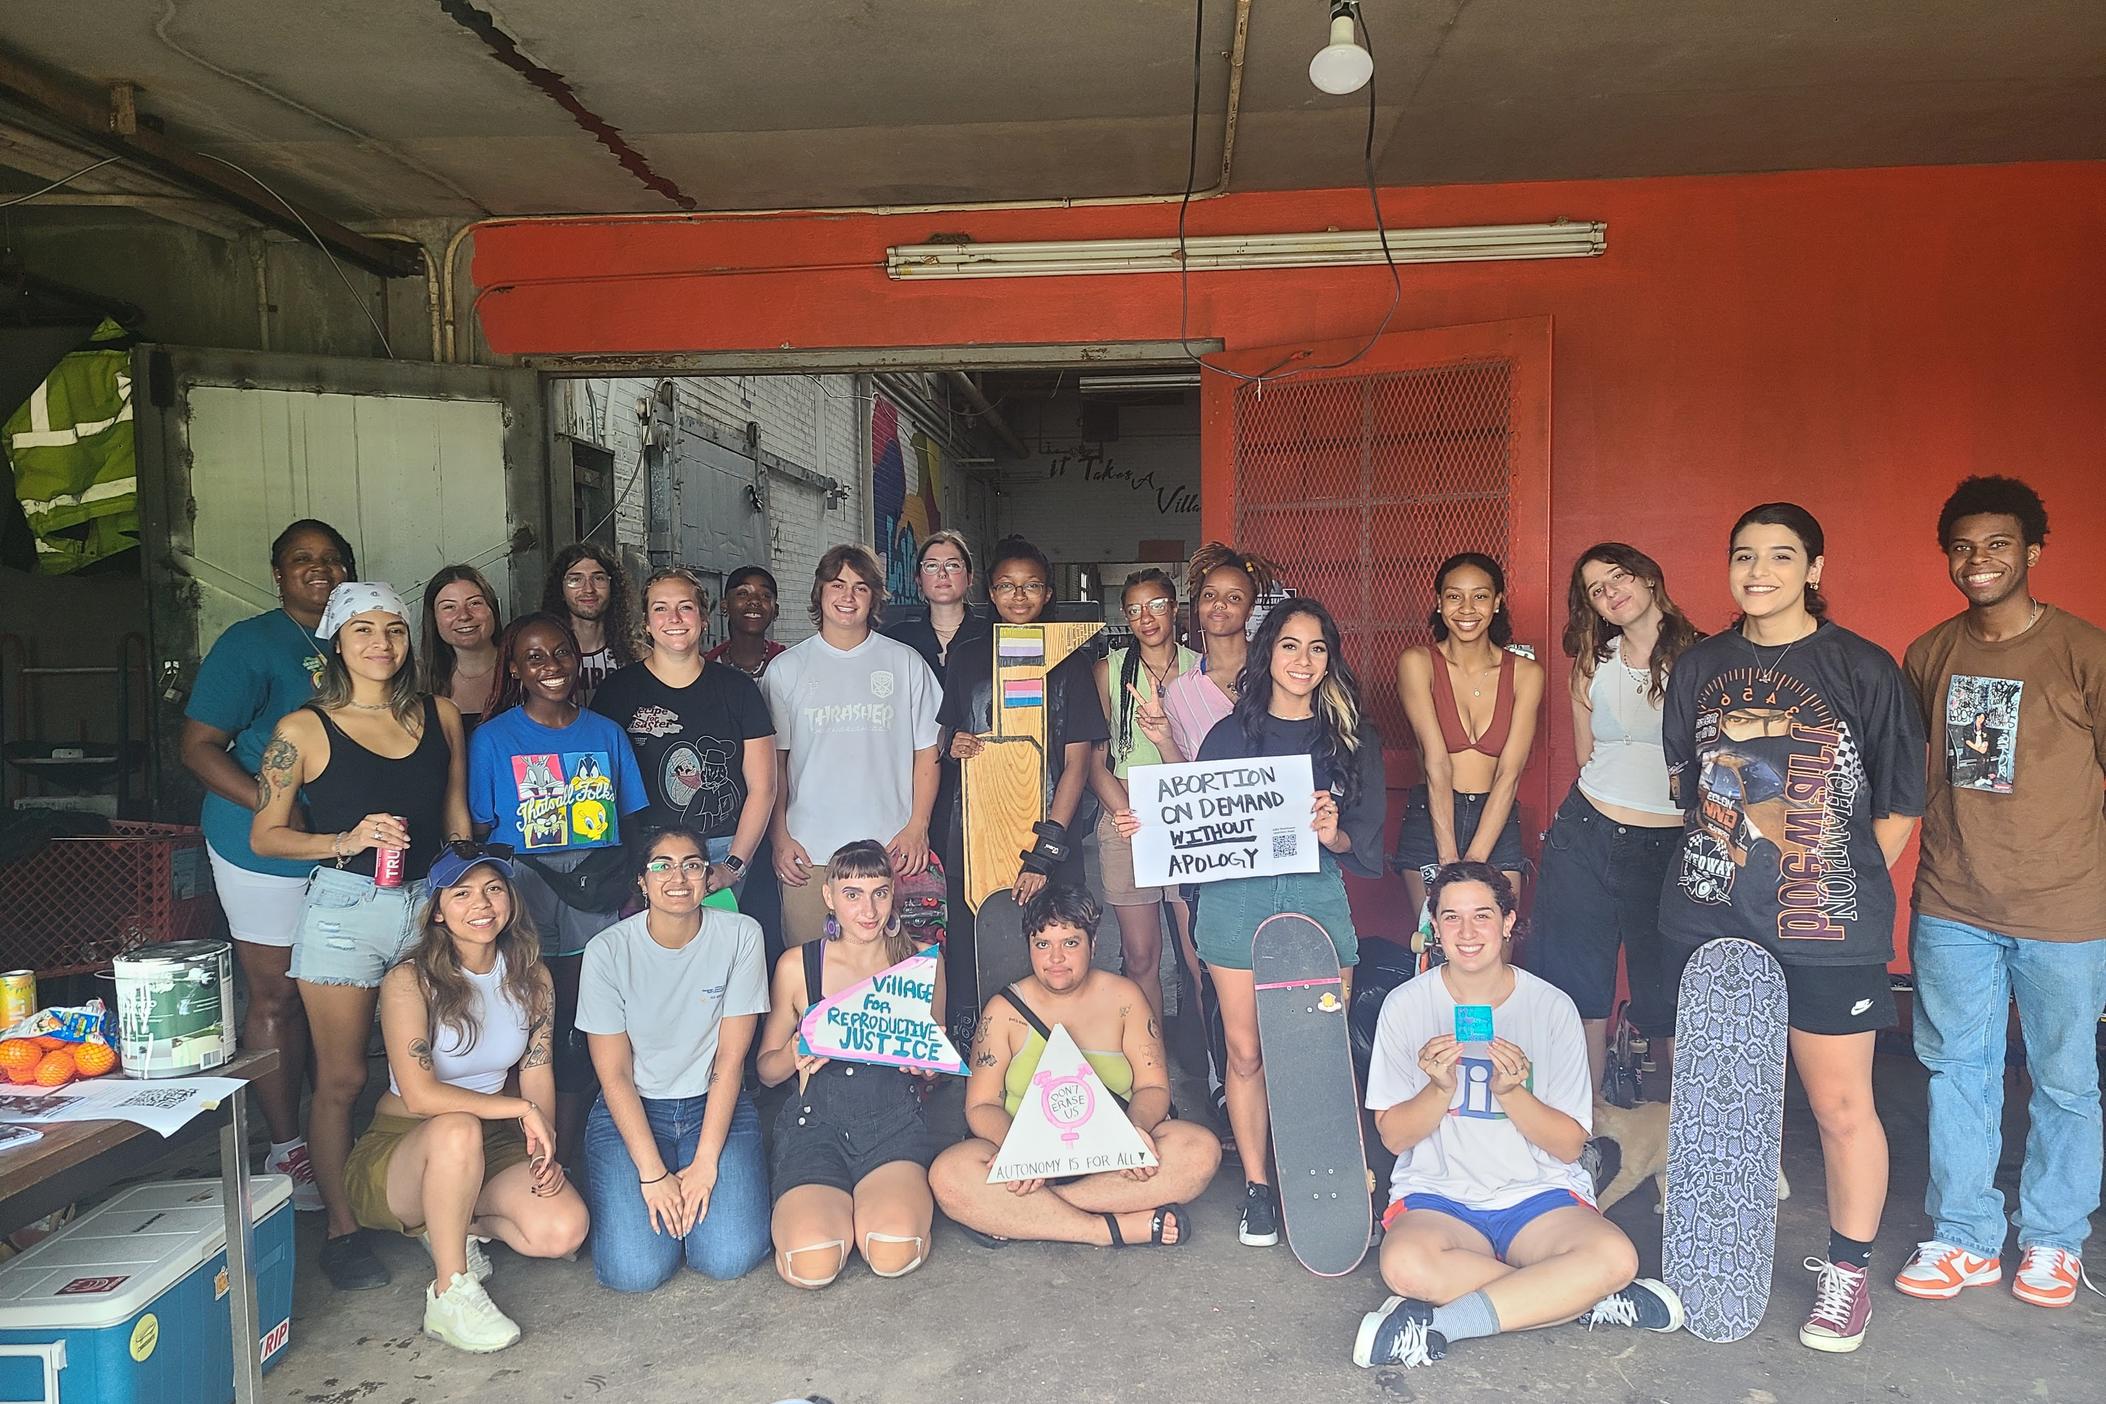 Members of the Lady Rippers skateboarding group gathered to talk about abortion and reproductive rights at Village Skatepark July 2022 following the decision to overturn Roe v. Wade.